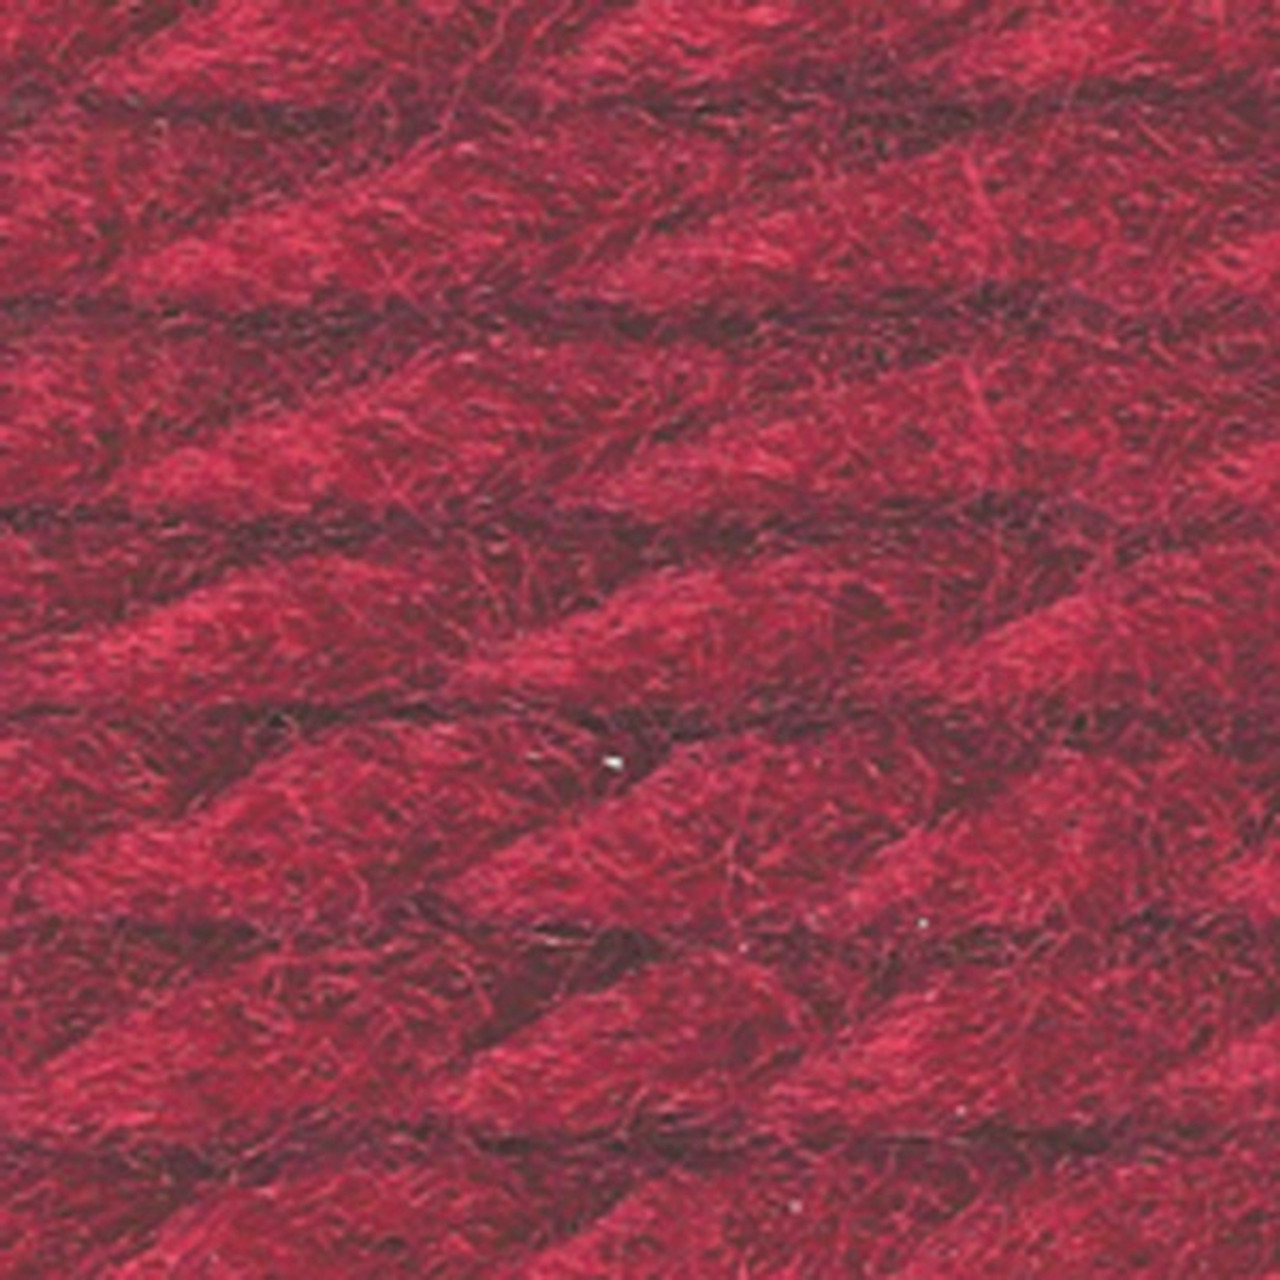 Lion Brand Cranberry Wool-Ease Thick & Quick Yarn (6 - Super Bulky)